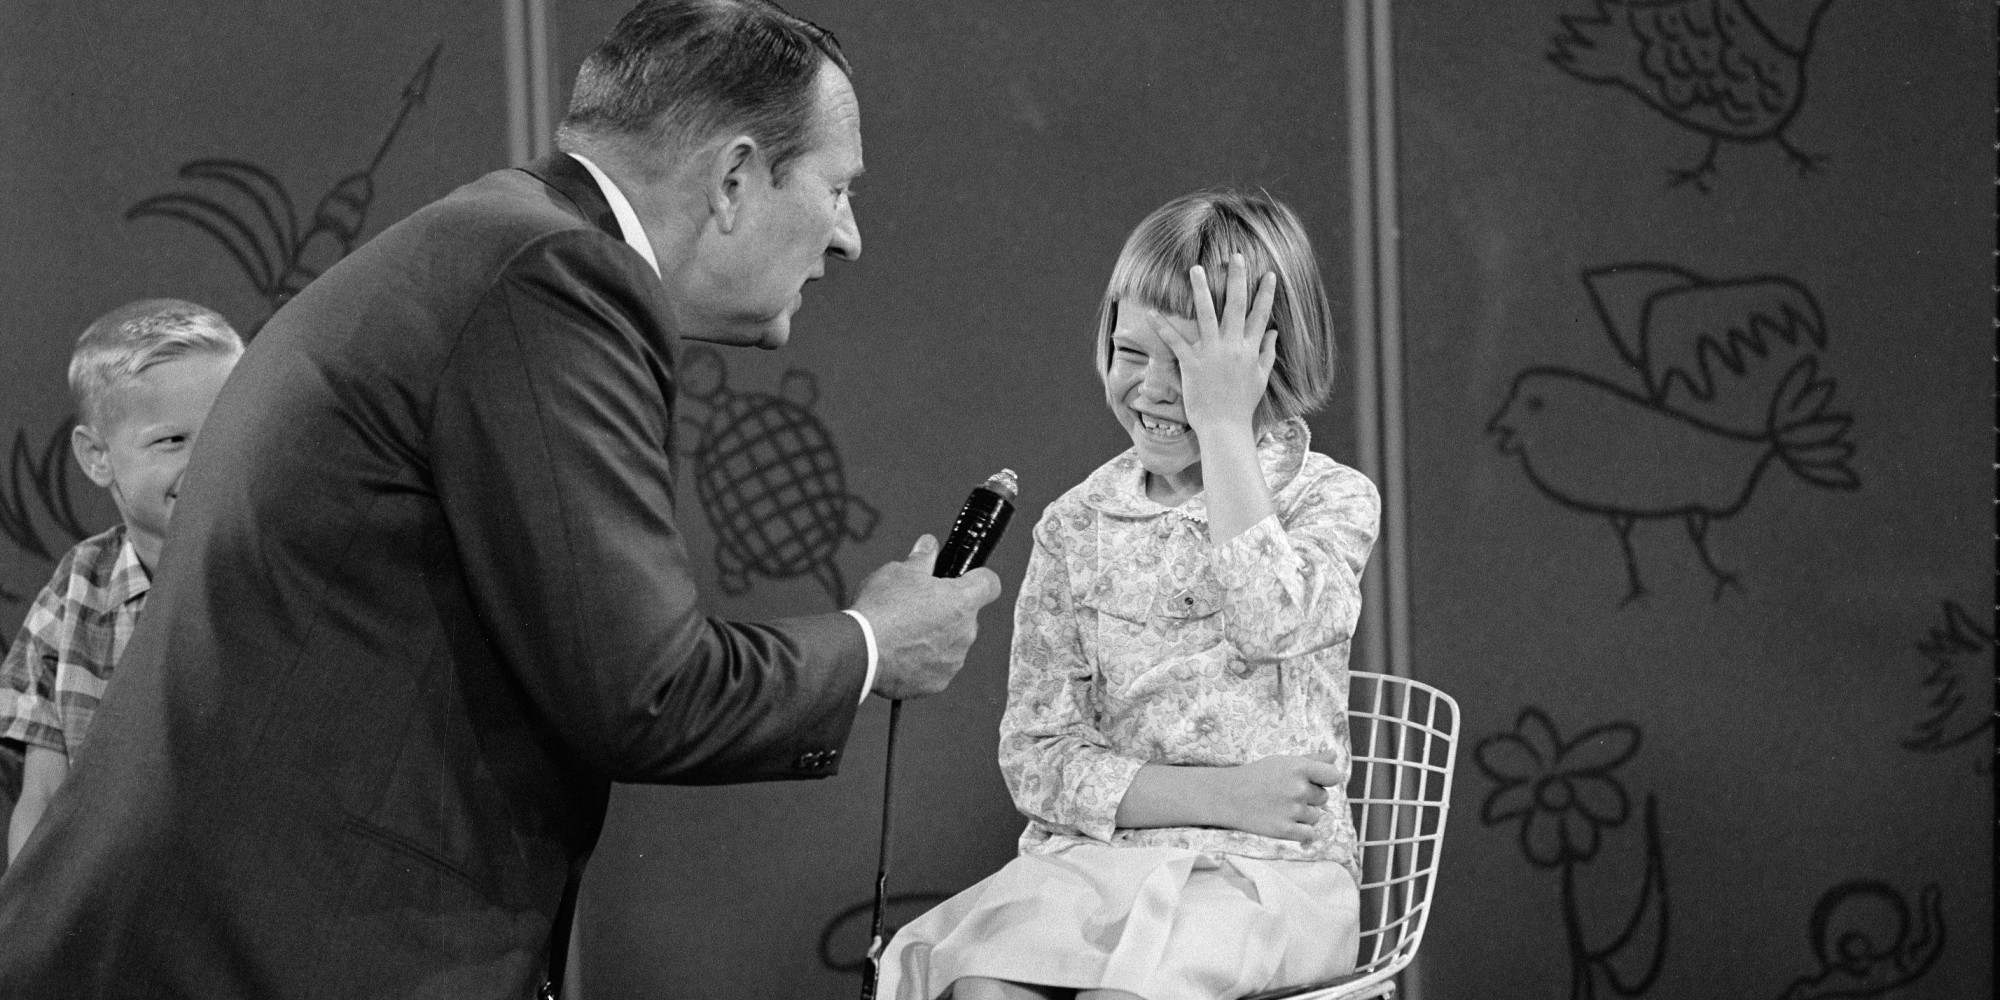 Canadian-born television host Art Linkletter (born Arthur Gordon Kelly) holds the microphone as he interviews an unidentified, laughing girl on an episode of the 'Kids Say the Darndest Things' segment of 'Art Linkletter's House Party,' April 23, 1965. (Photo by CBS Photo Archive/Getty Images)